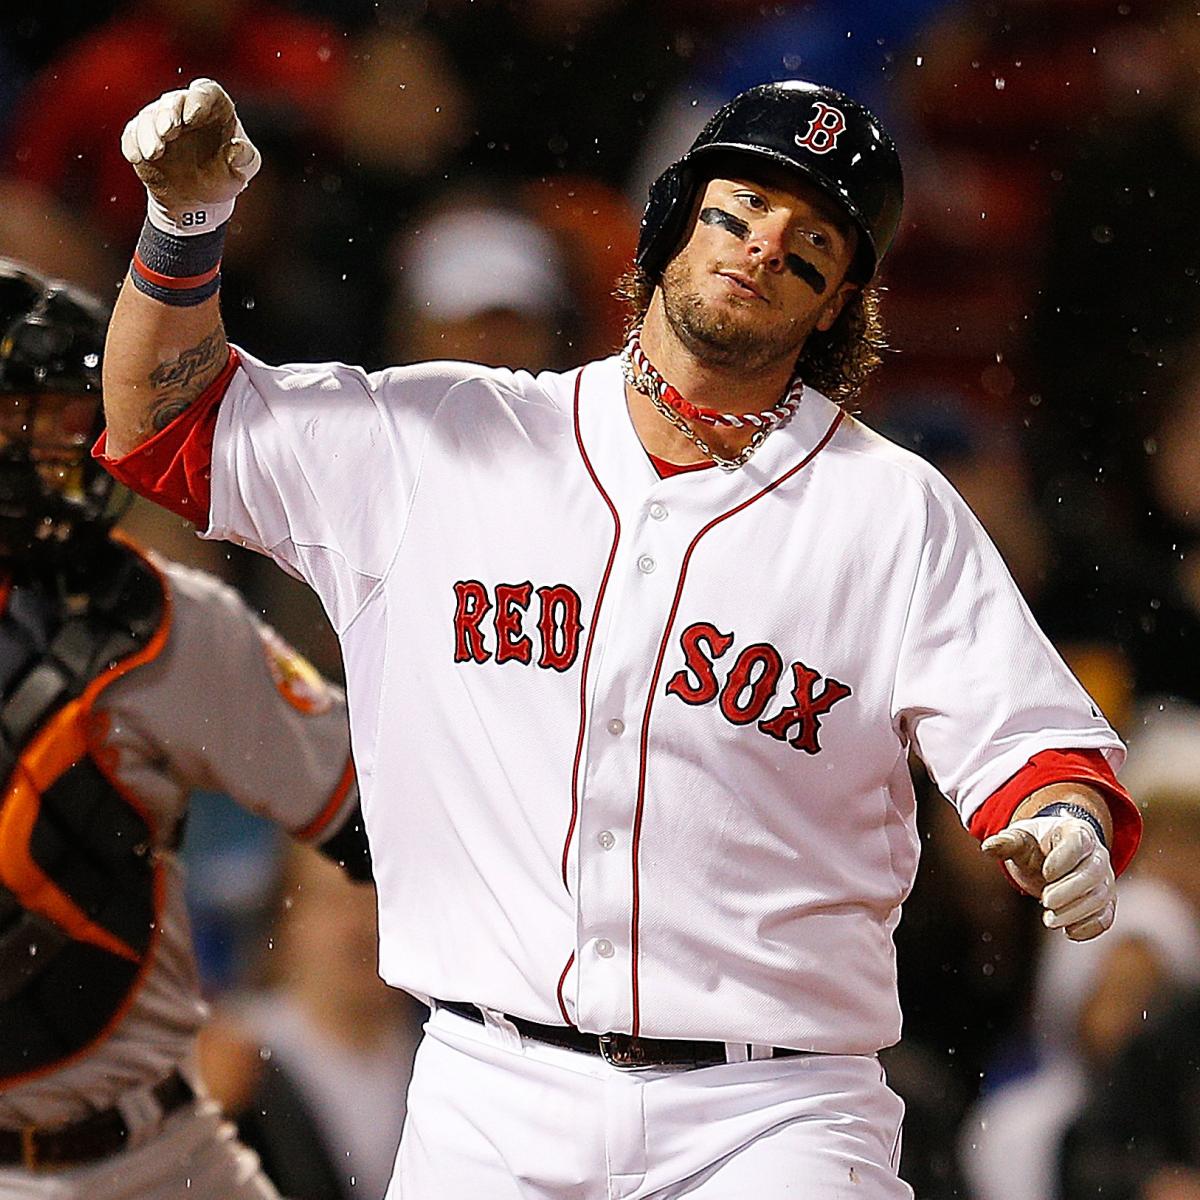 Red Sox unlikely to pursue out-of-favor Saltalamacchia